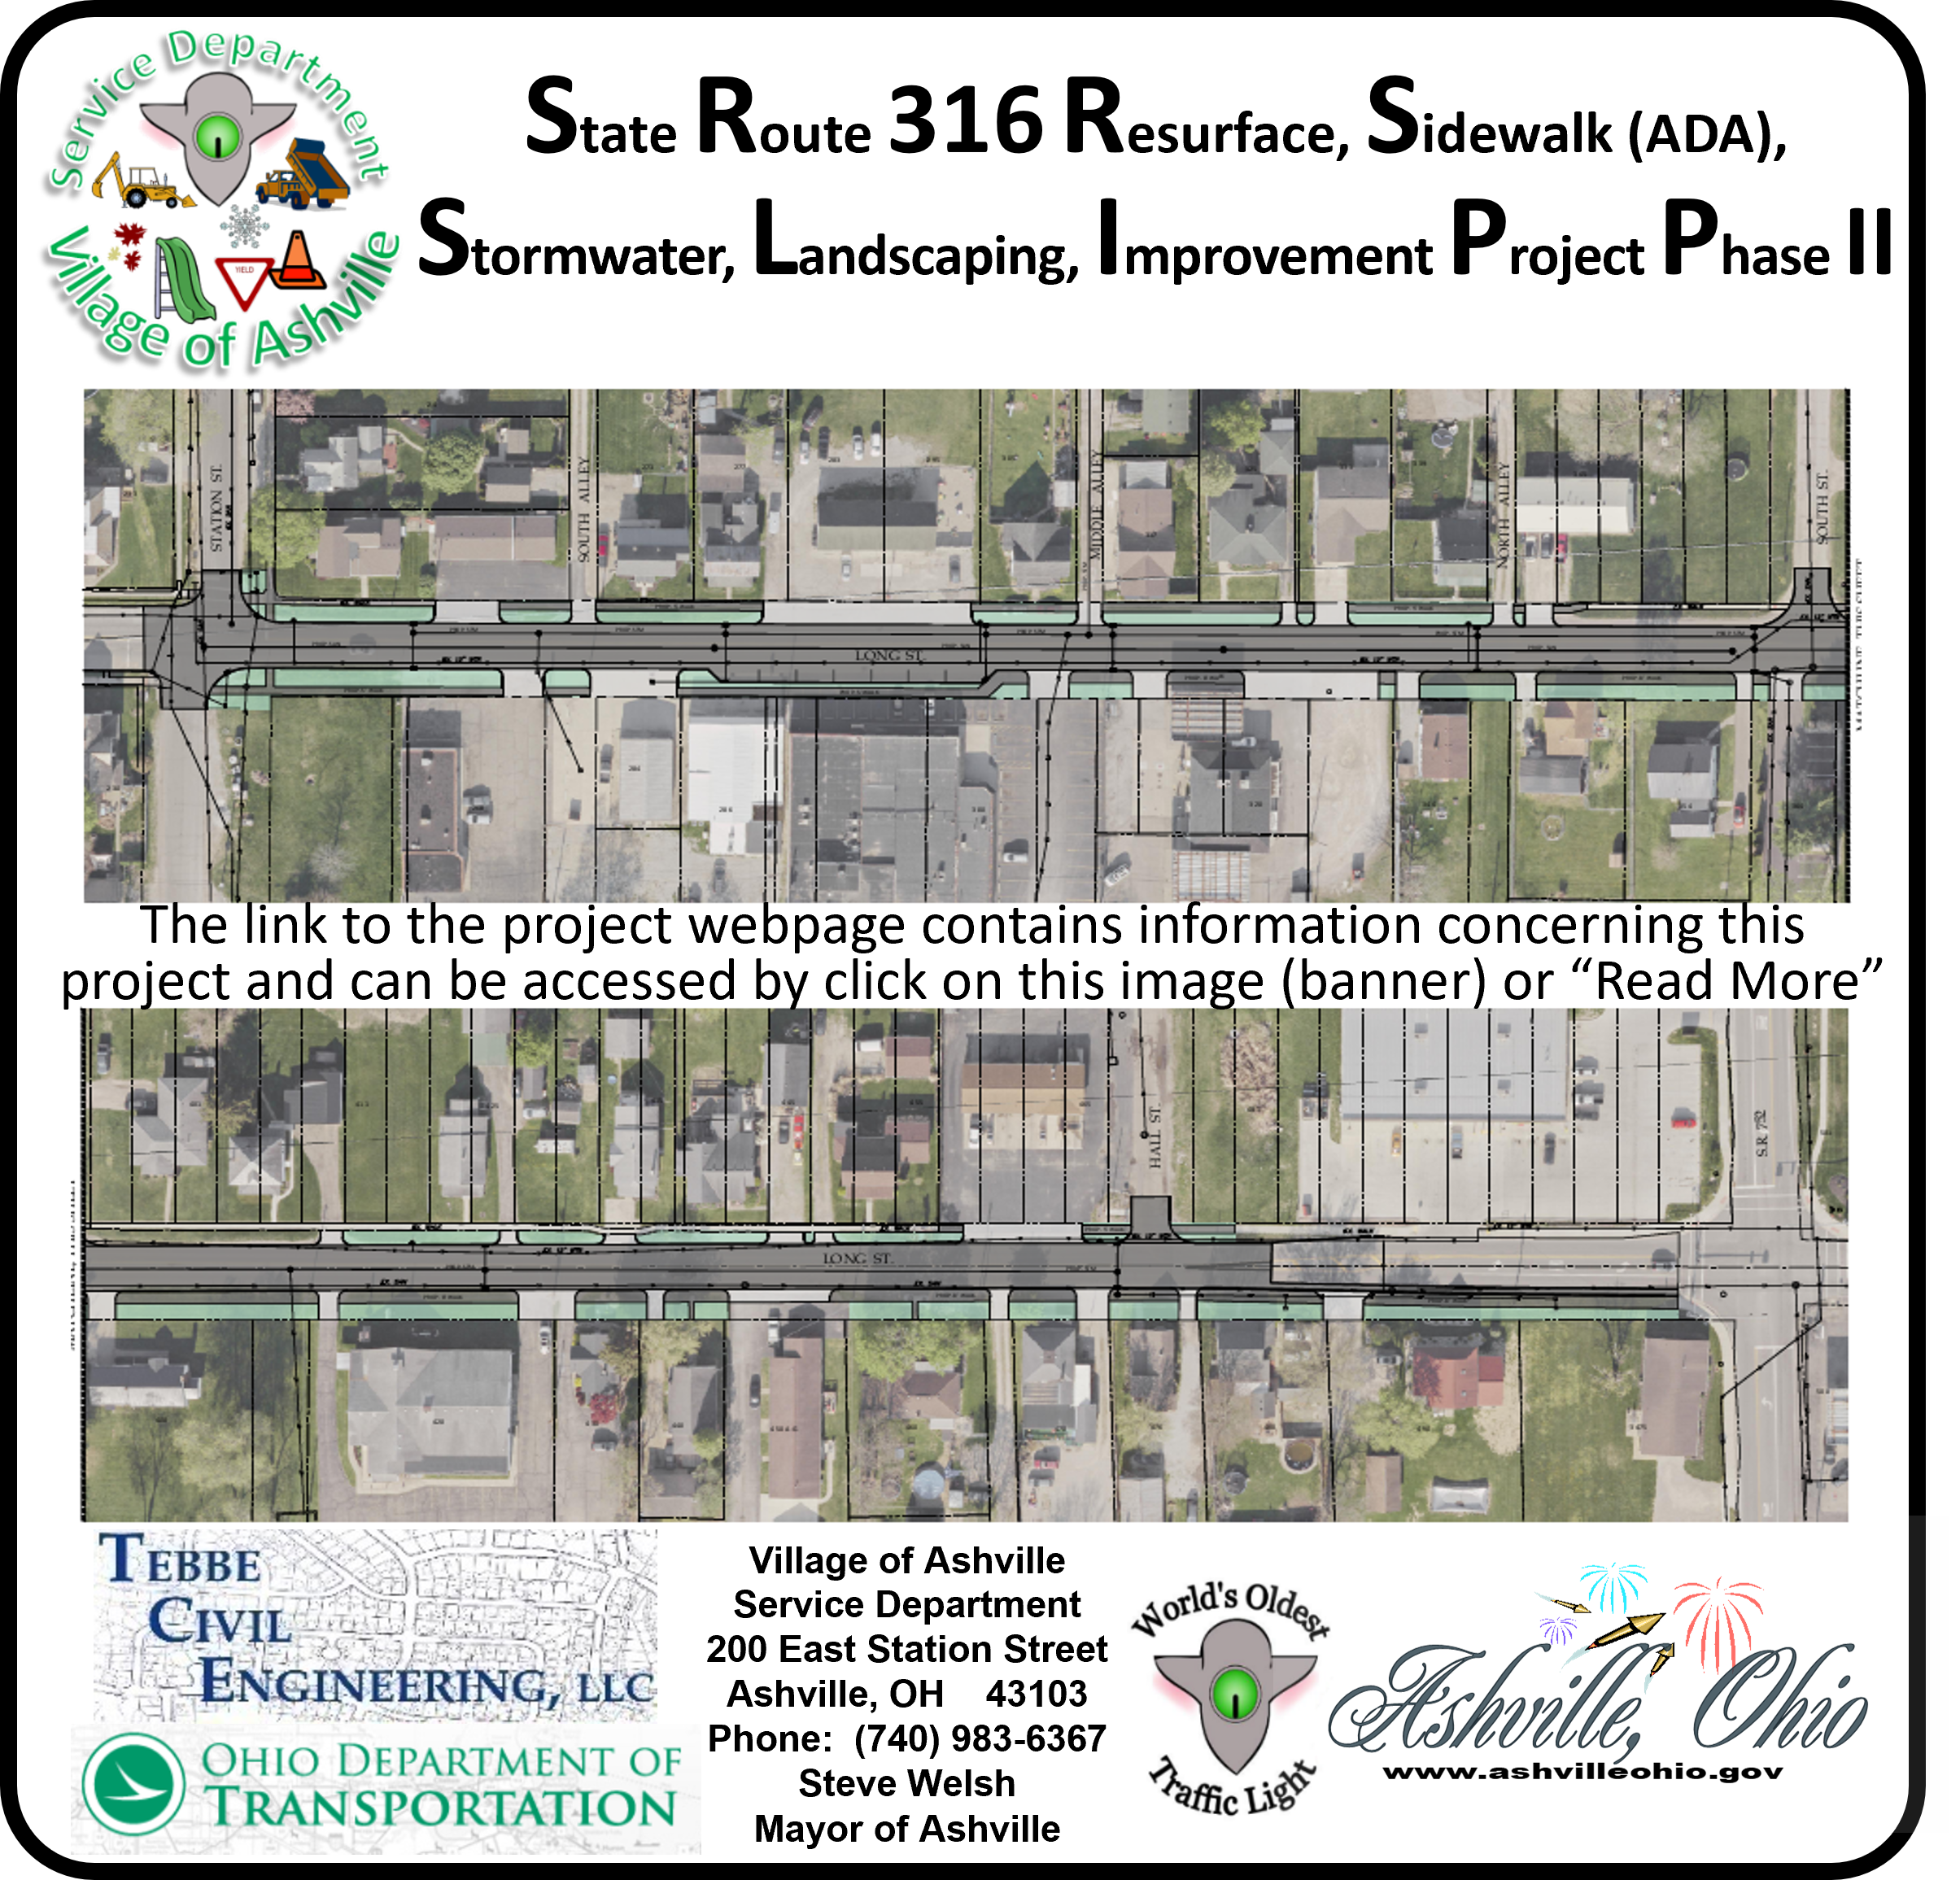 Phase II of the State Route 316 Project